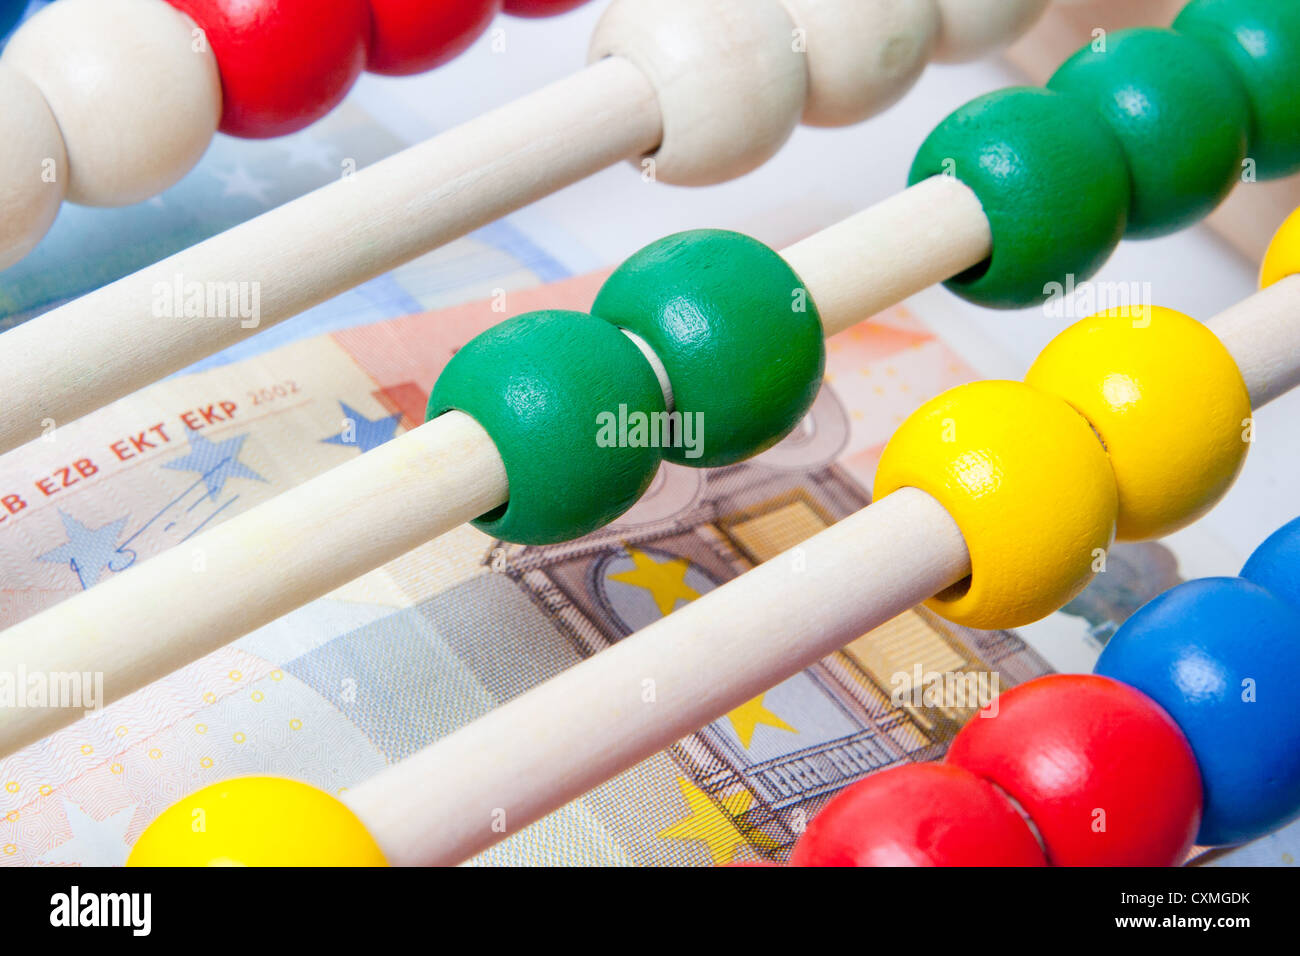 Education concept - Abacus with many colorful beads and banknotes in background Stock Photo